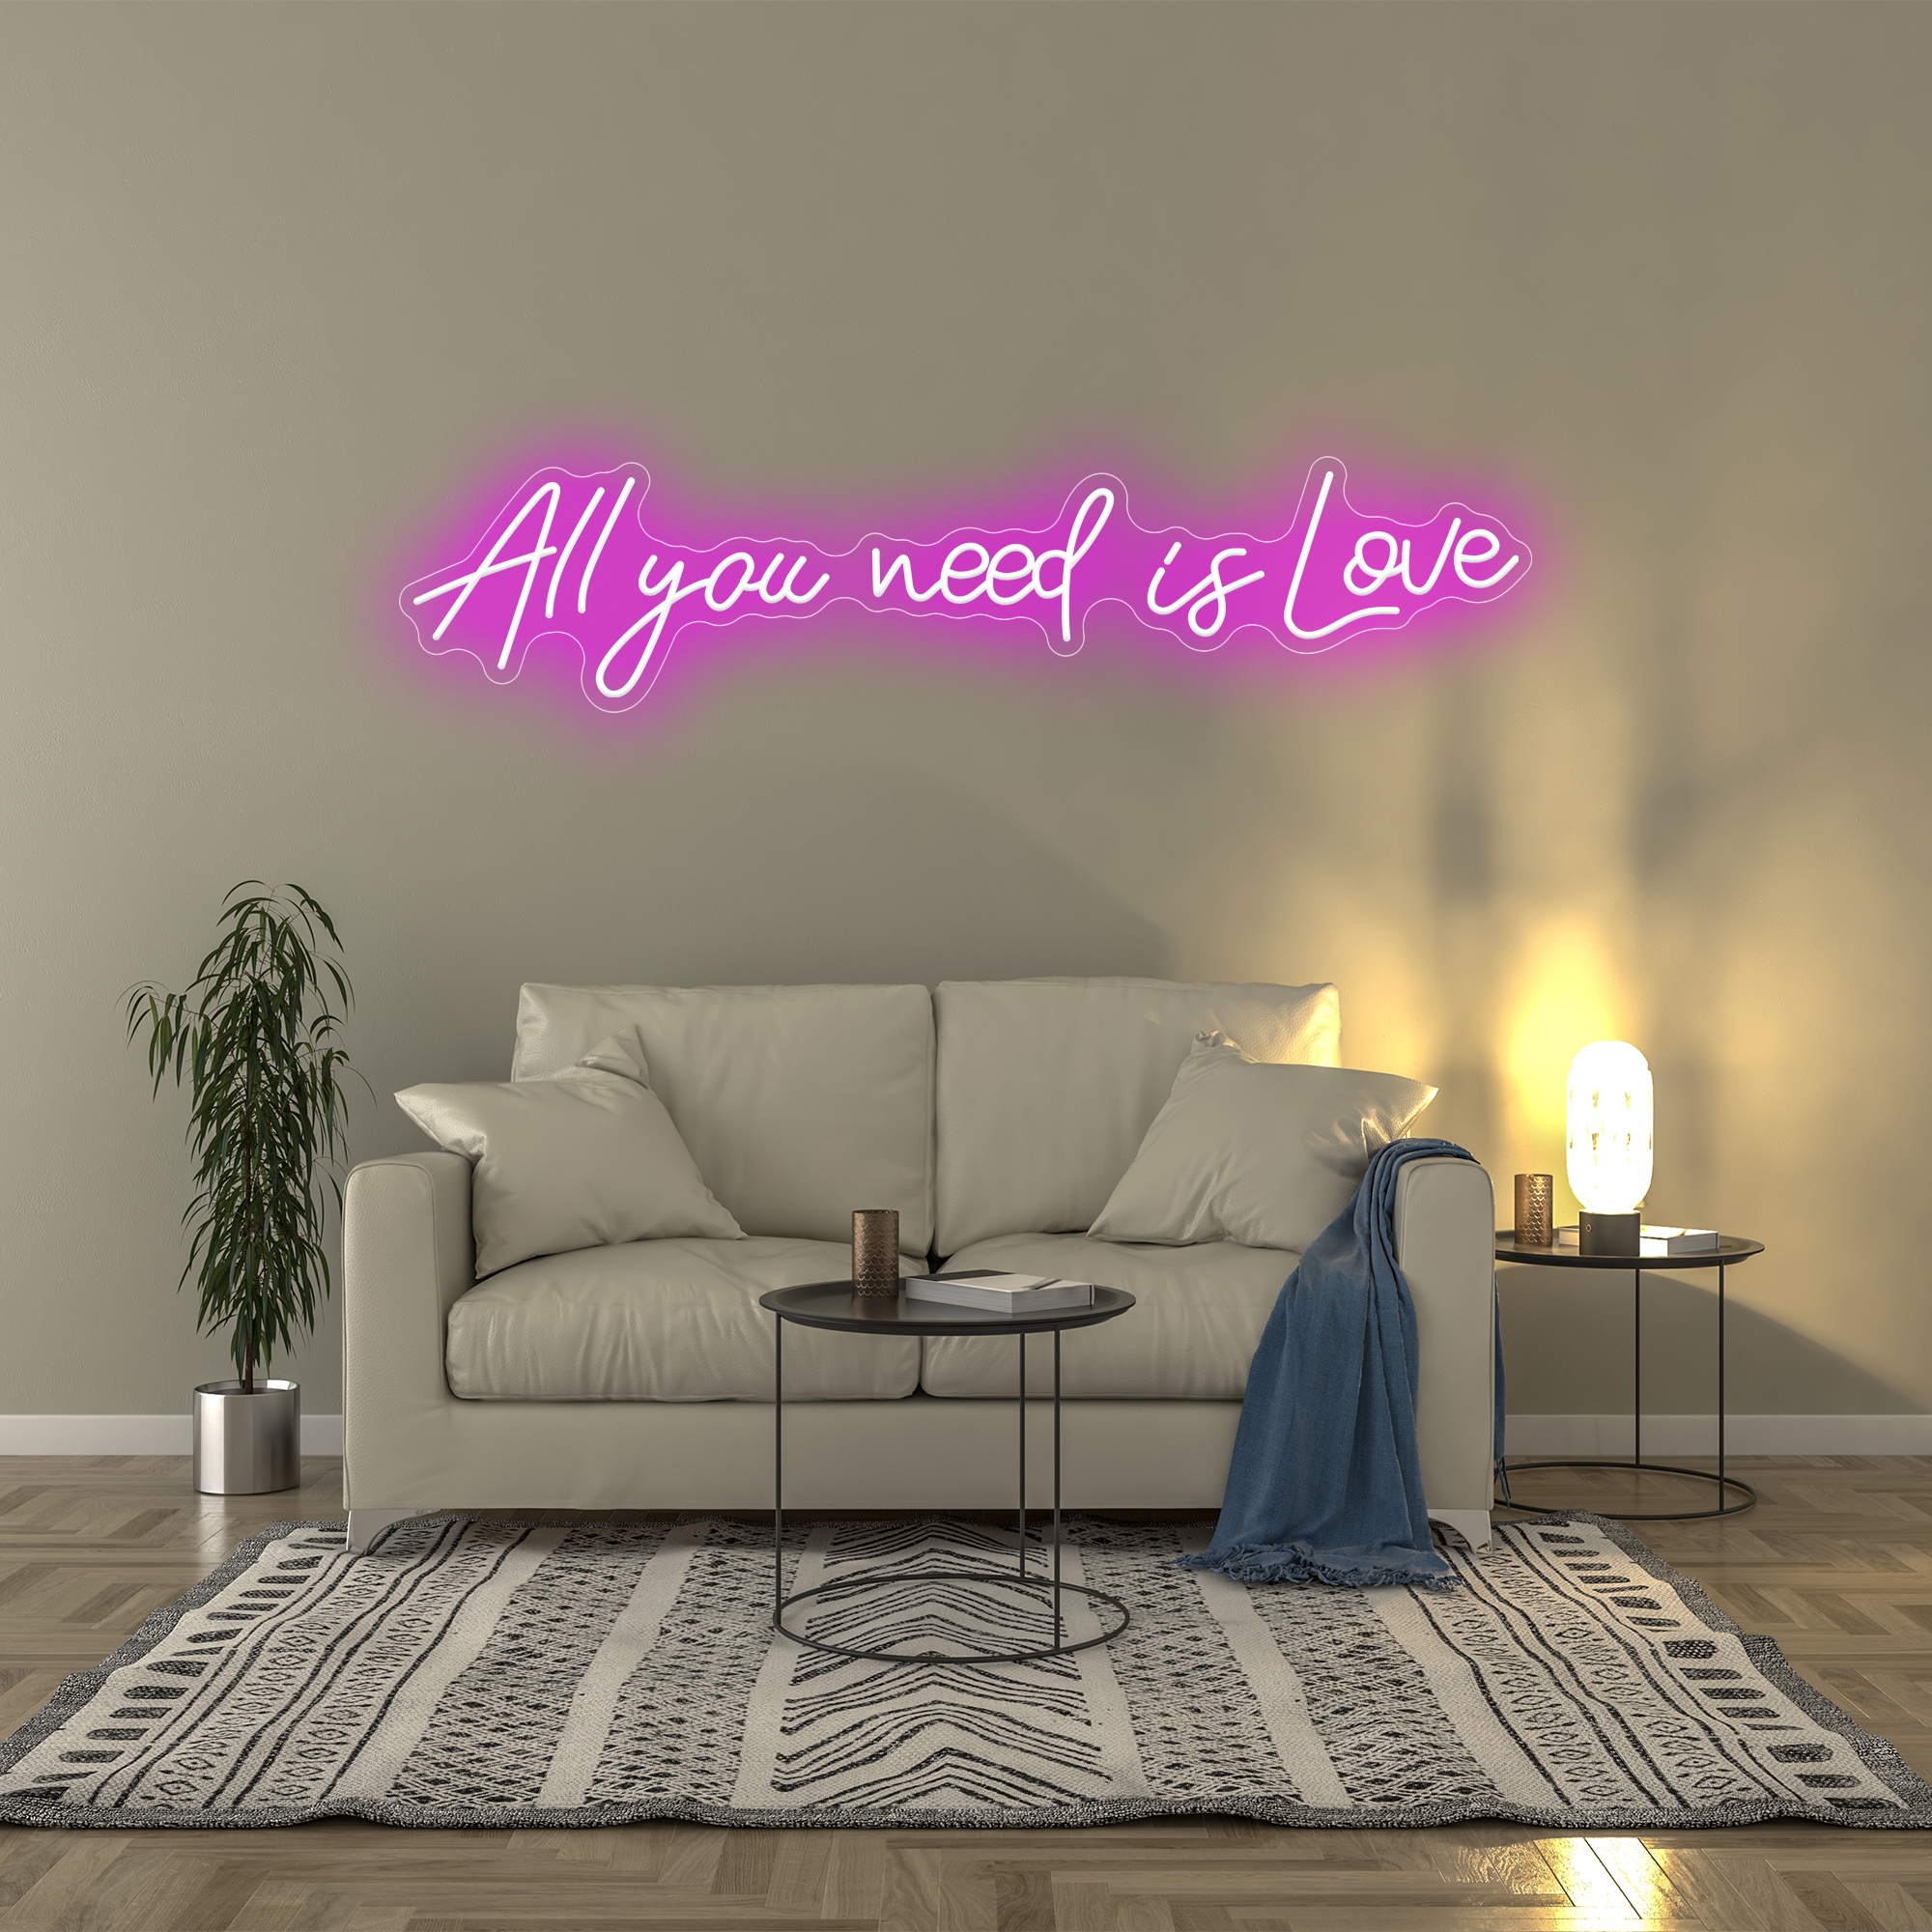 All you need is love - Neon Sign-MHneonsign